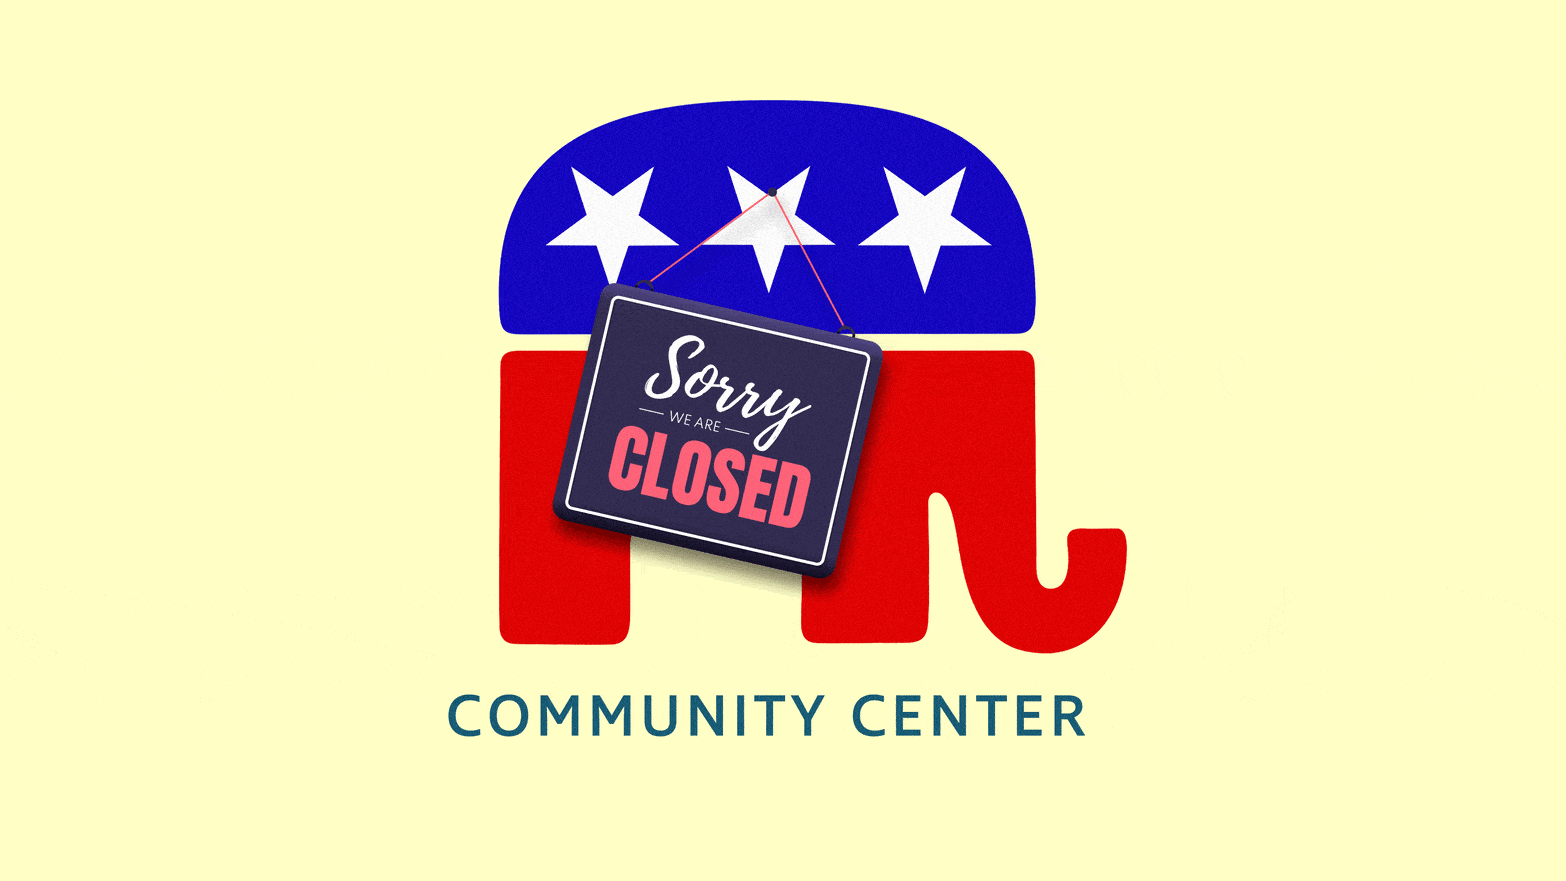 An animated gif of a closed sign swinging on the GOP elephant symbol